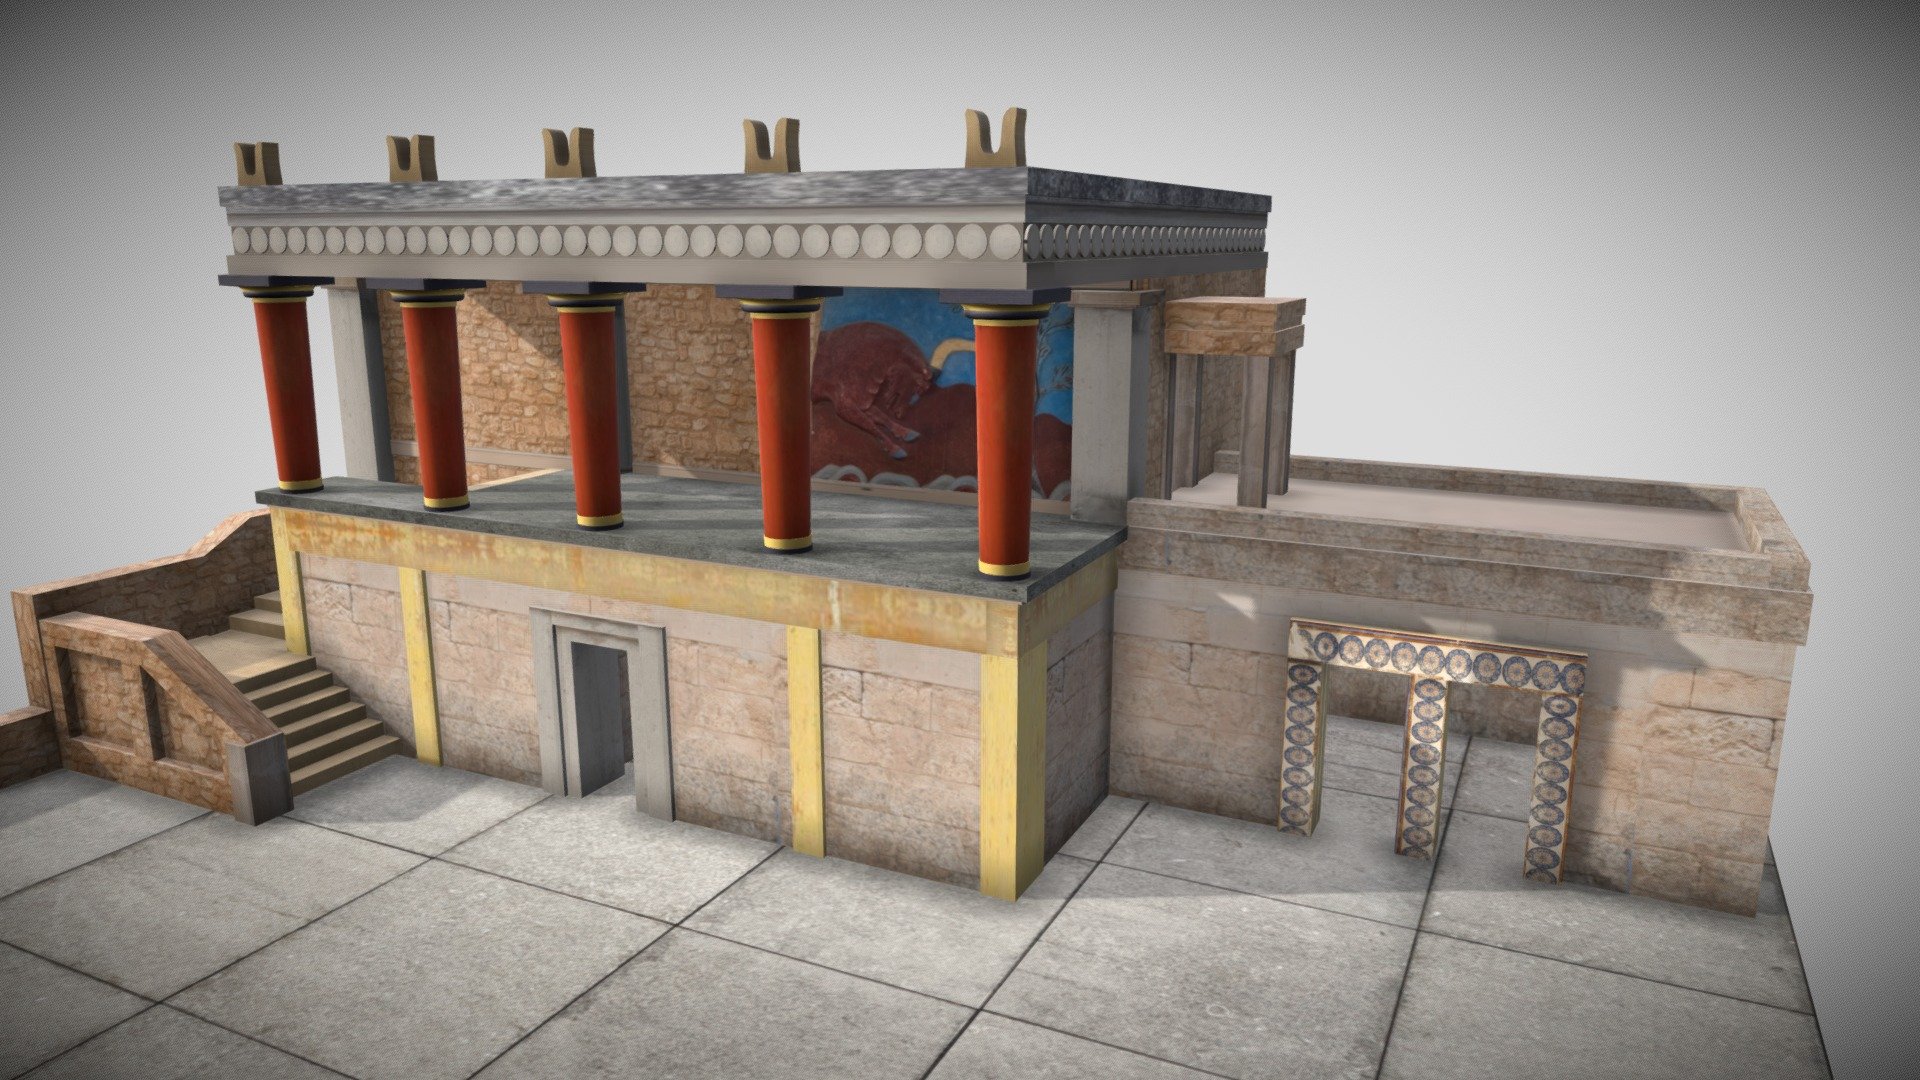 Knossos is the largest Bronze Age archaeological site on Crete and has been called Europe's oldest city. Settled as early as the Neolithic period, the name Knossos survives from ancient Greek references to the major city of Crete. Wikipedia

Location: Heraklion, Crete, Greece - Knossos Recreated - Low poly - Buy Royalty Free 3D model by FXPEAR 3d model